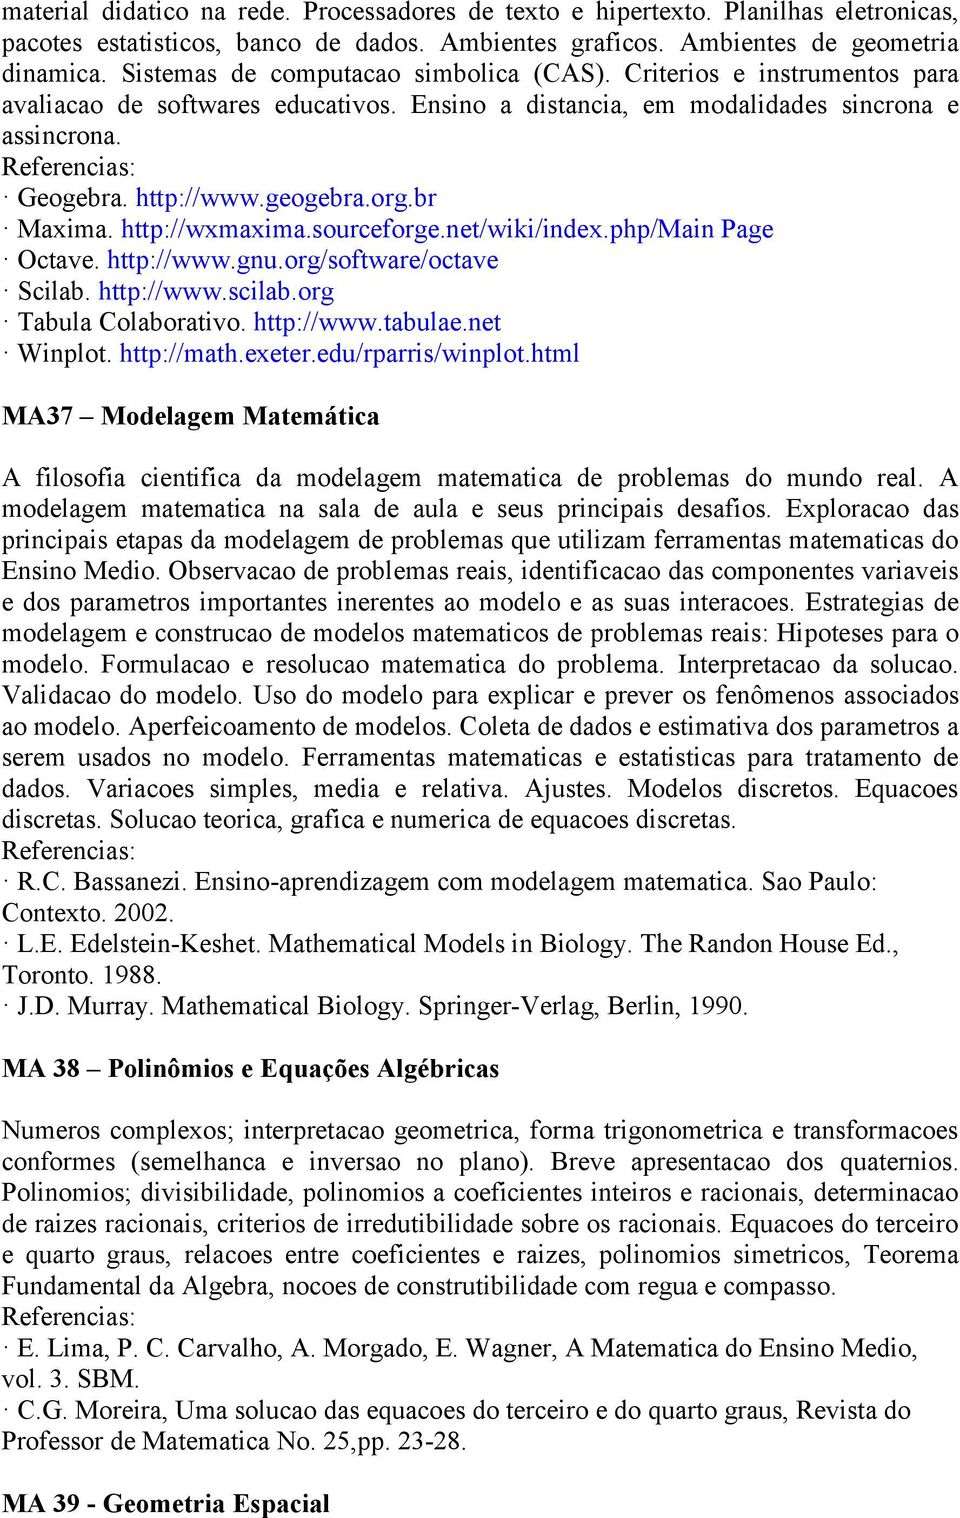 br Maxima. http://wxmaxima.sourceforge.net/wiki/index.php/main Page Octave. http://www.gnu.org/software/octave Scilab. http://www.scilab.org Tabula Colaborativo. http://www.tabulae.net Winplot.